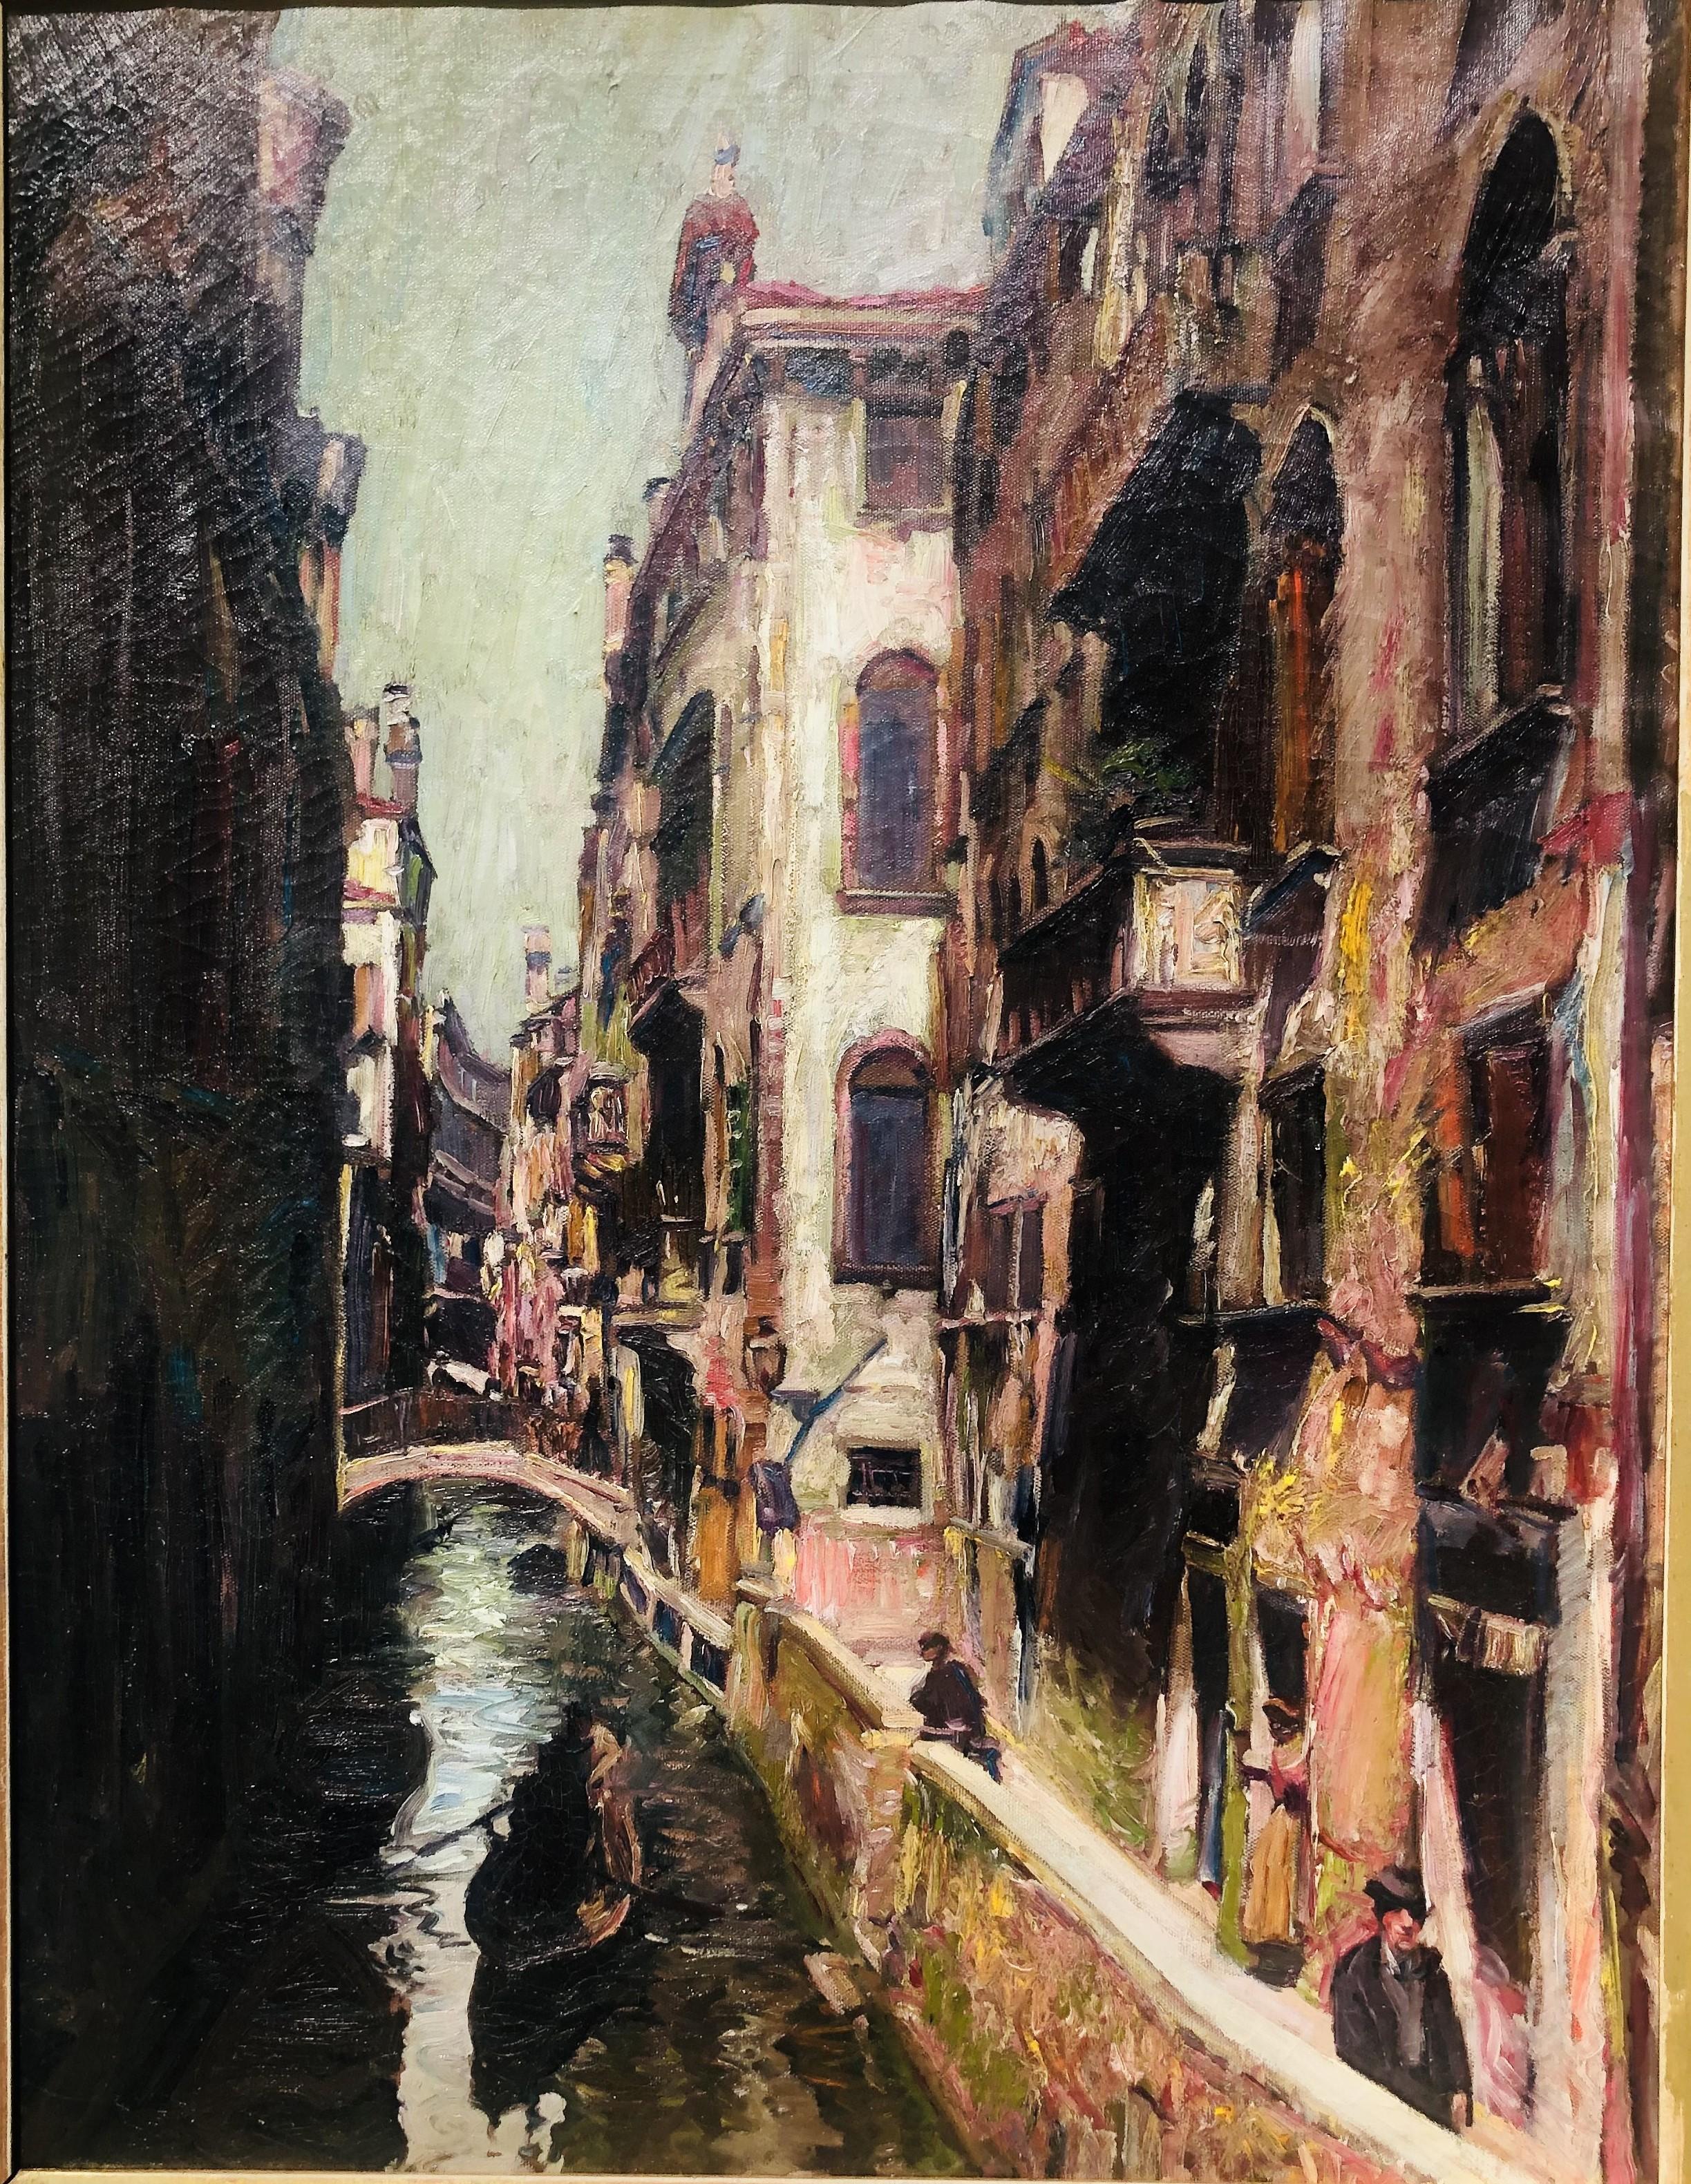 Here is a fine, early American Impressionist painting of a Venetian Canal. The painting is oil on canvass measuring 36